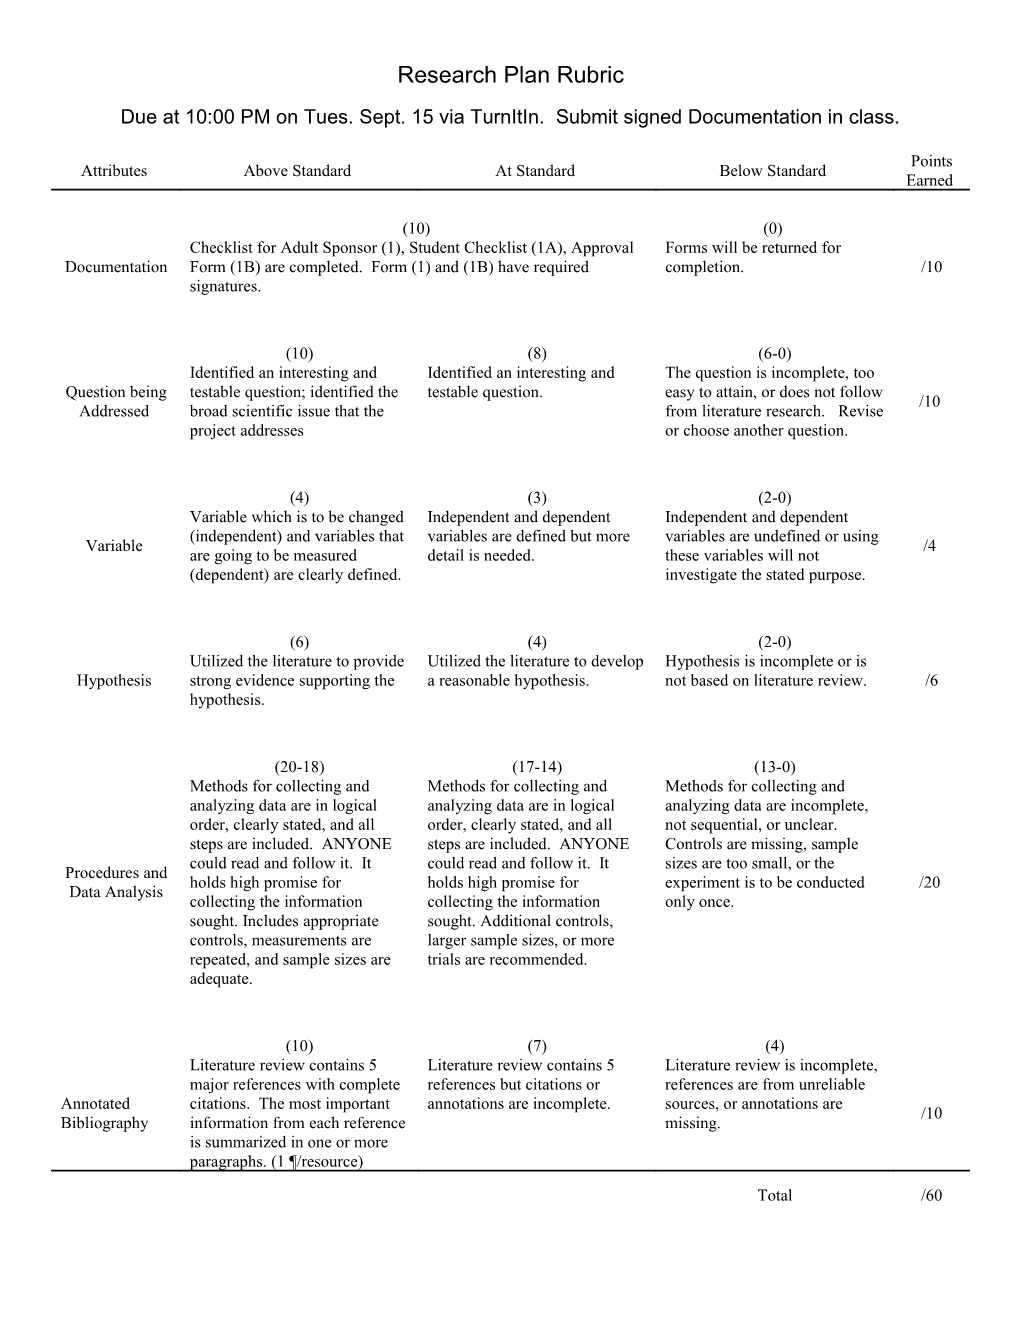 Rubric for Science Fair Introduction and Materials and Methods